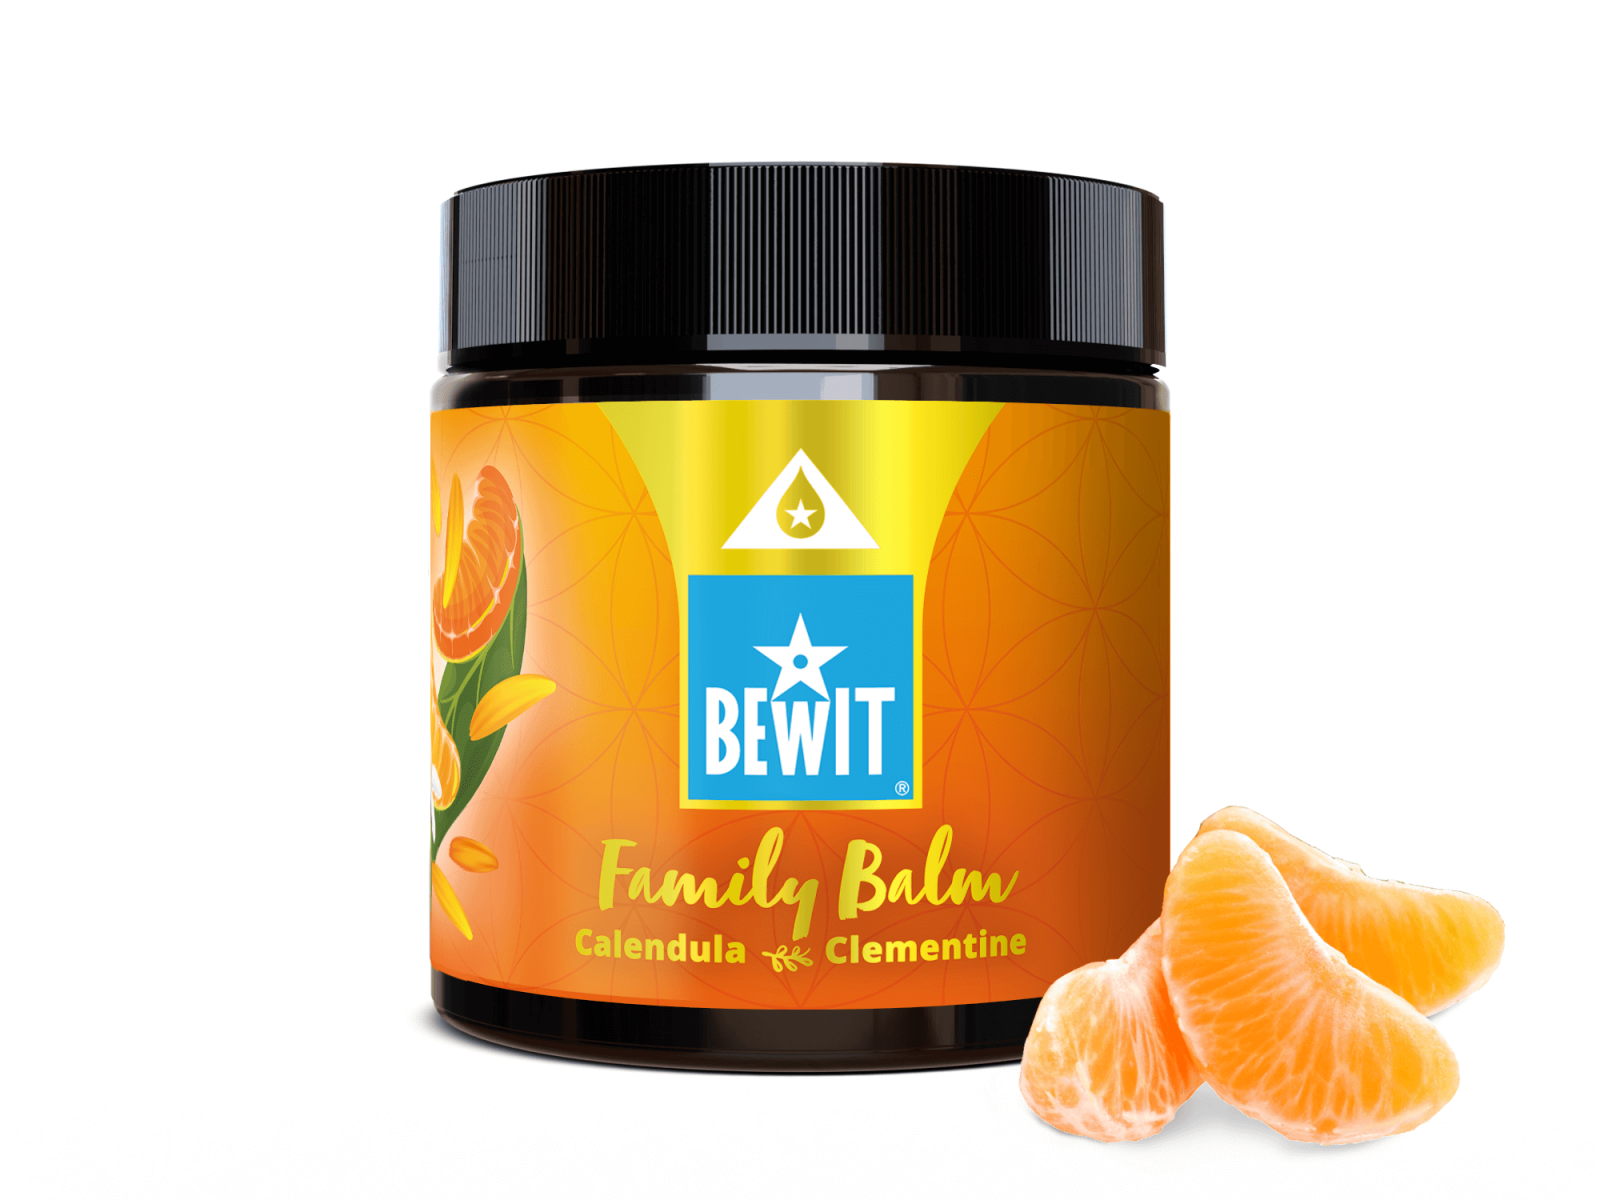 FAMILY BALM CALENDULA AND CLEMENTINE - CARING BALM FOR THE WHOLE FAMILY